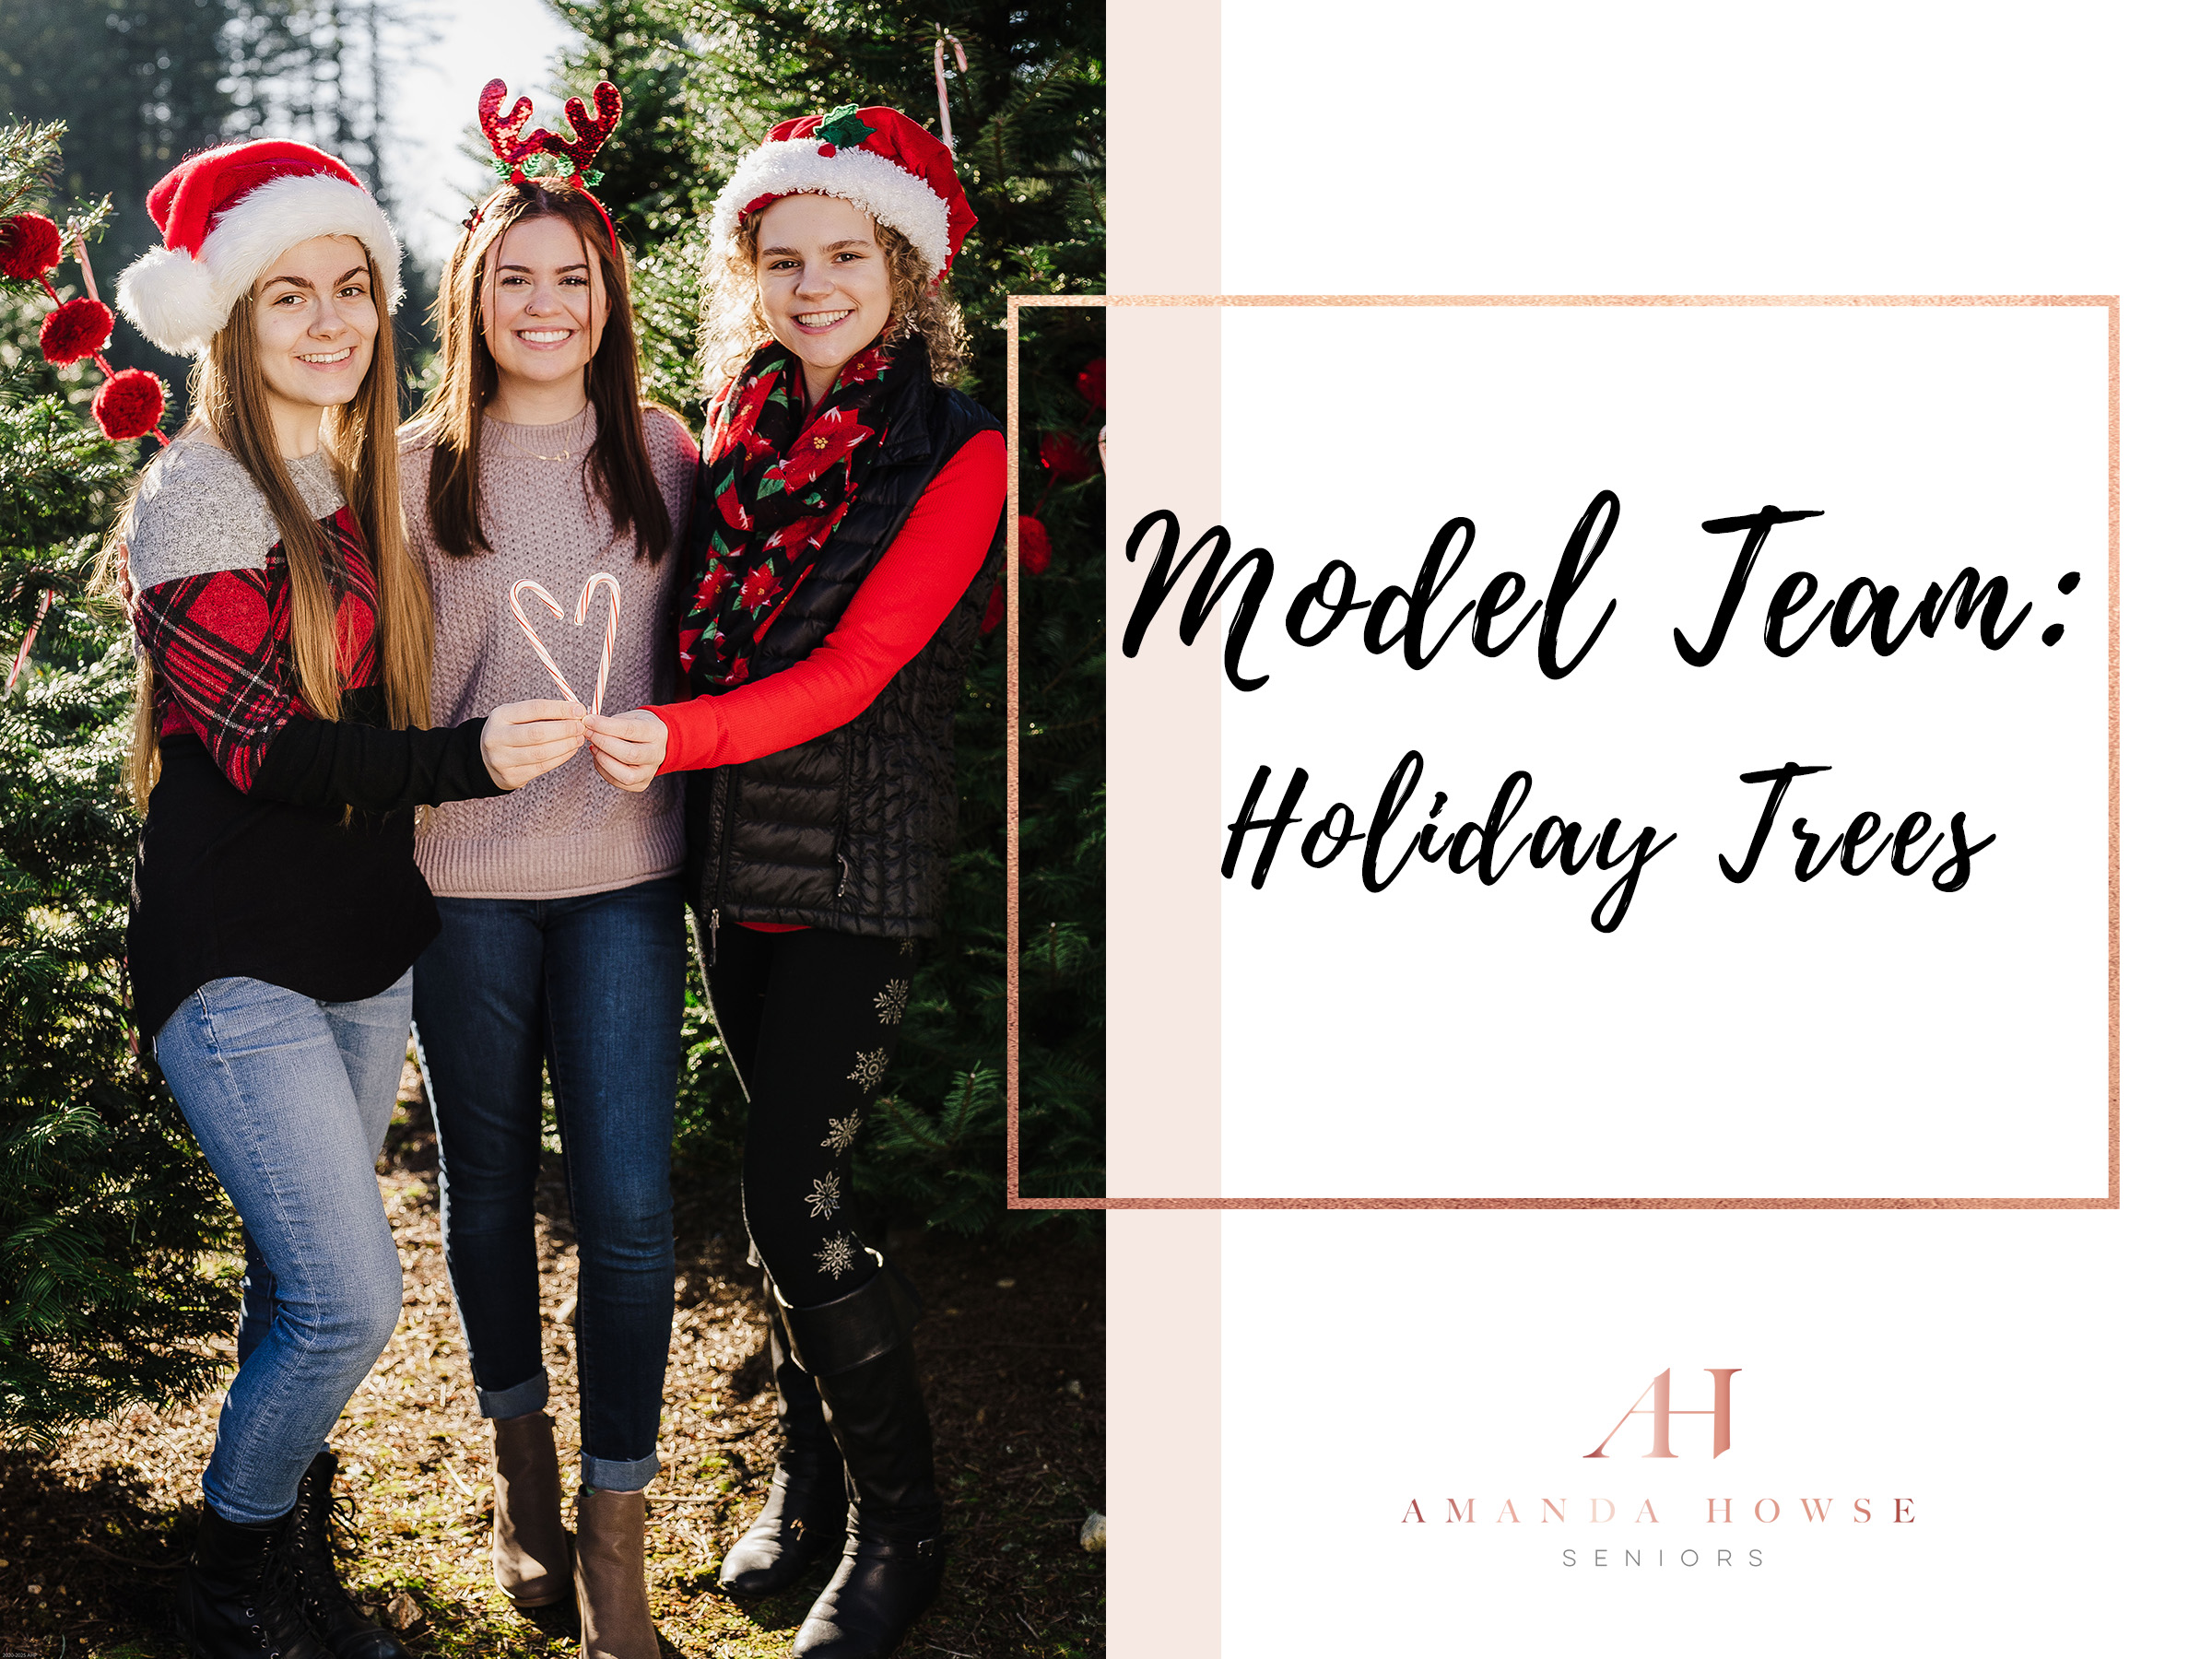 Holiday Tree Farm Portraits | The 2021 AHP Model Team got together for some fun holiday themed portraits at Wreath Works Christmas Tree Farm in Port Orchard. Read the blog to learn more! | Photographed by Tacoma Senior Portrait Photographer Amanda Howse